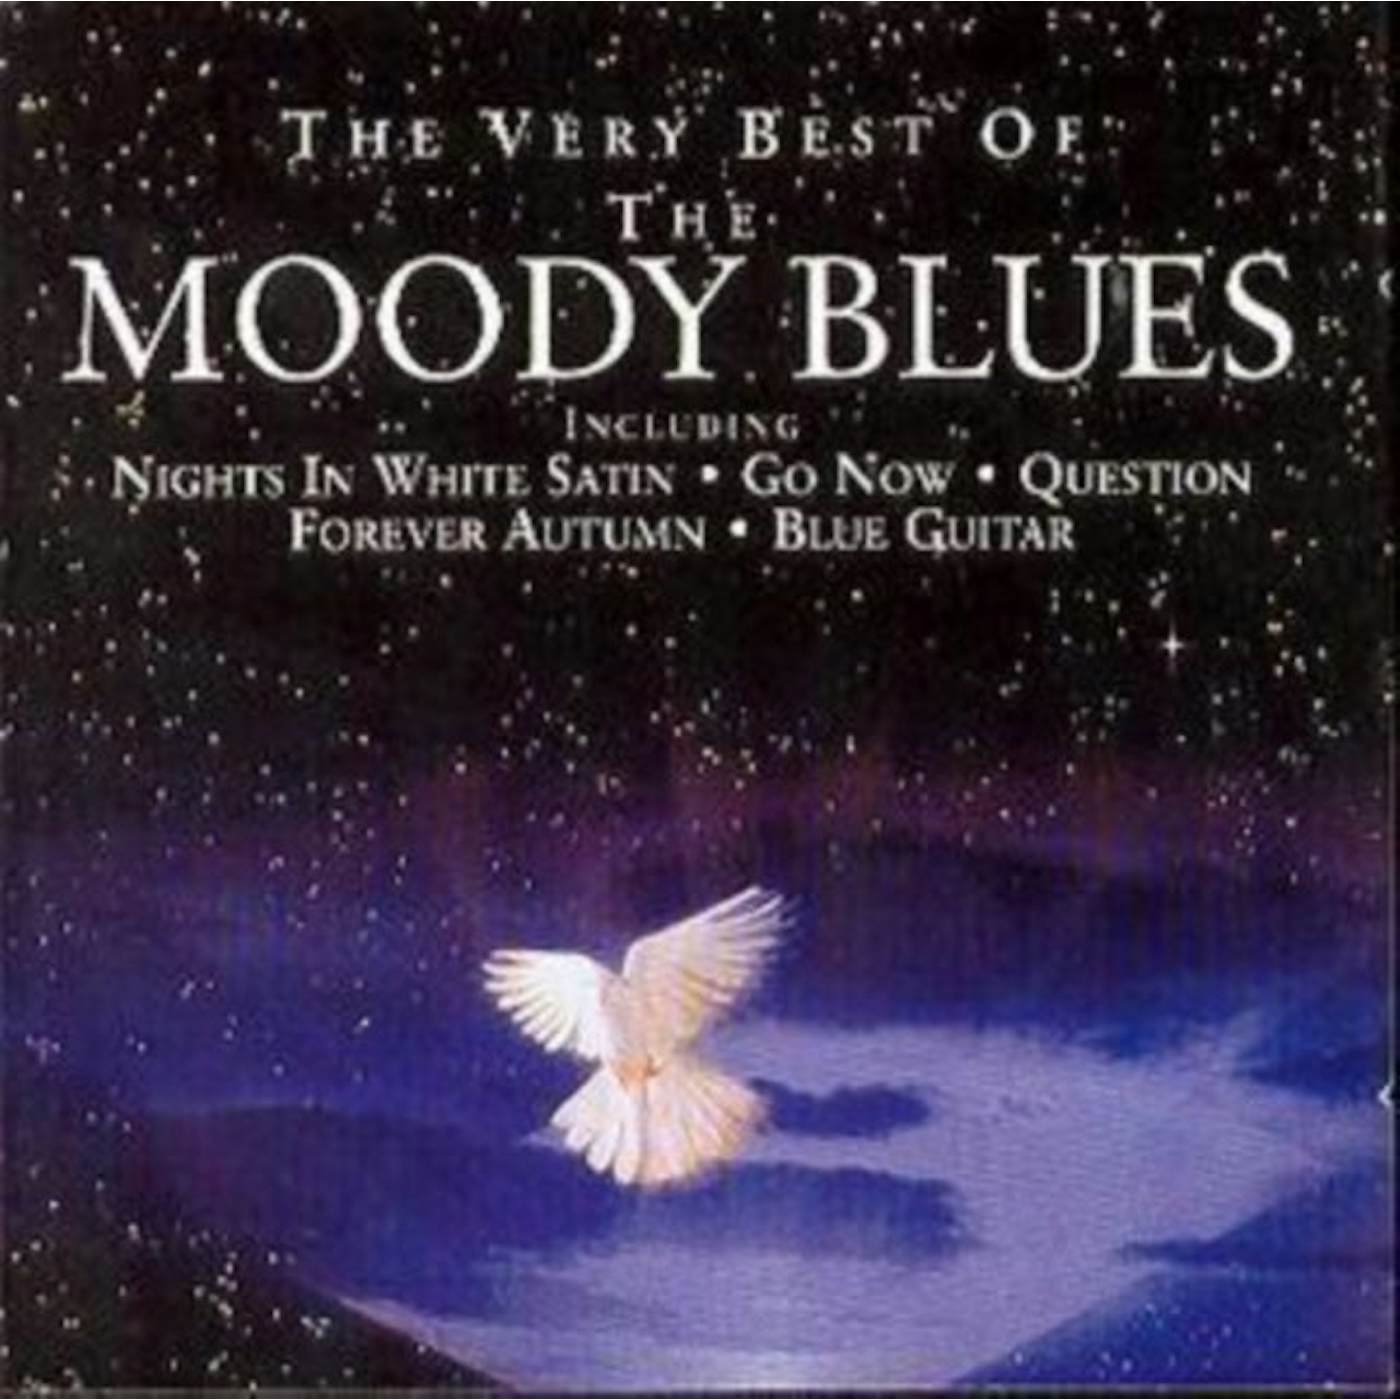 The Moody Blues CD - The Very Best Of